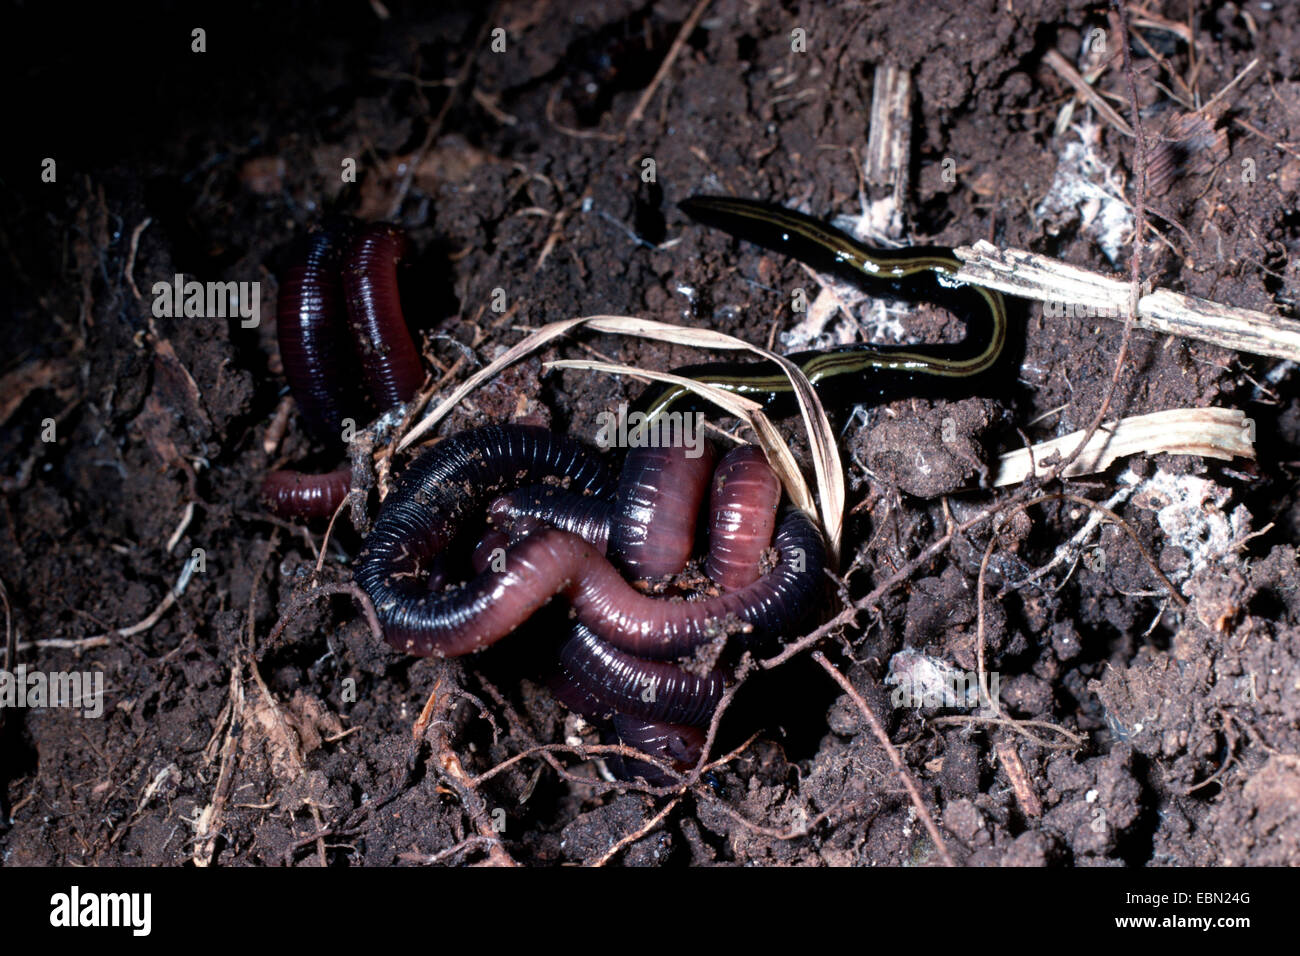 giant Gippsland earthworm, karmai (Megascolides australis), passing the dry season coiled up in the soil ground of the rain forest together with a flatworm, Australia, Queensland Stock Photo